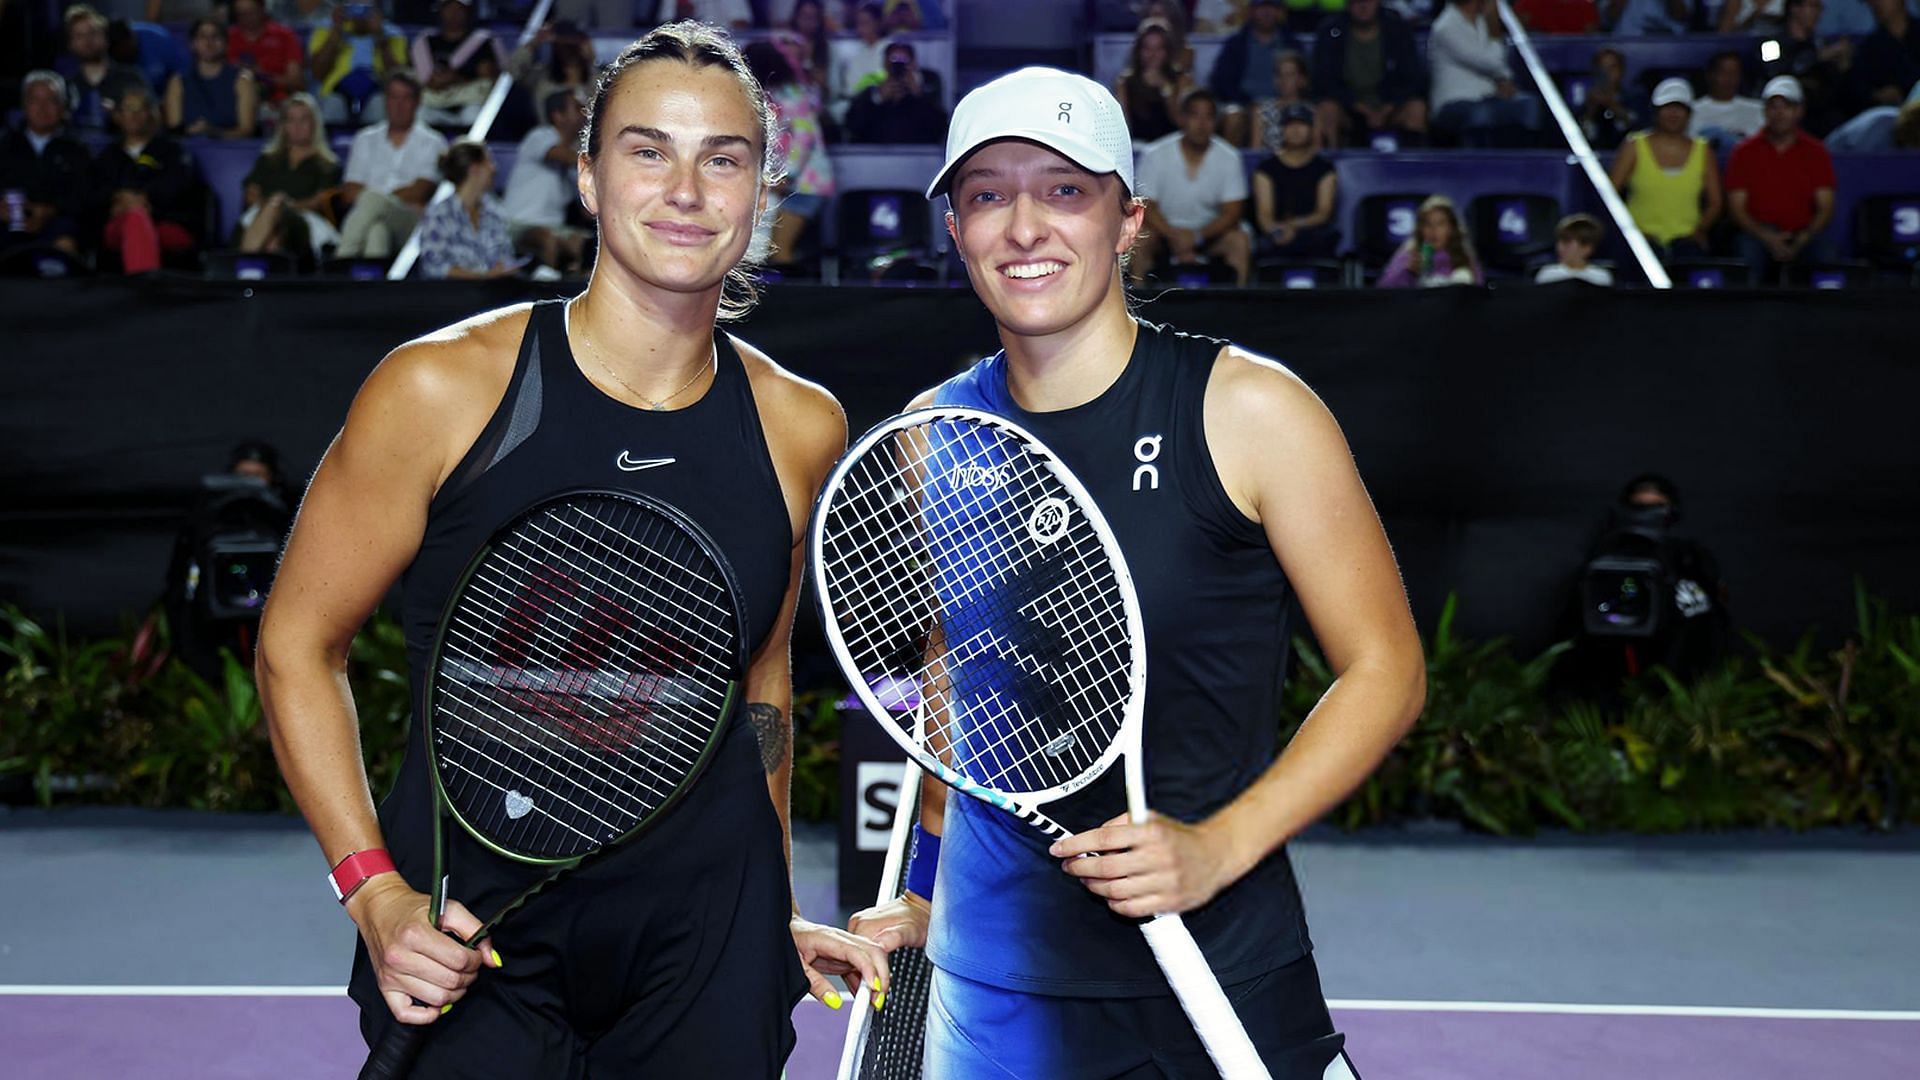 Aryna Sabalenka and Iga Swiatek are under fire for their recent comments